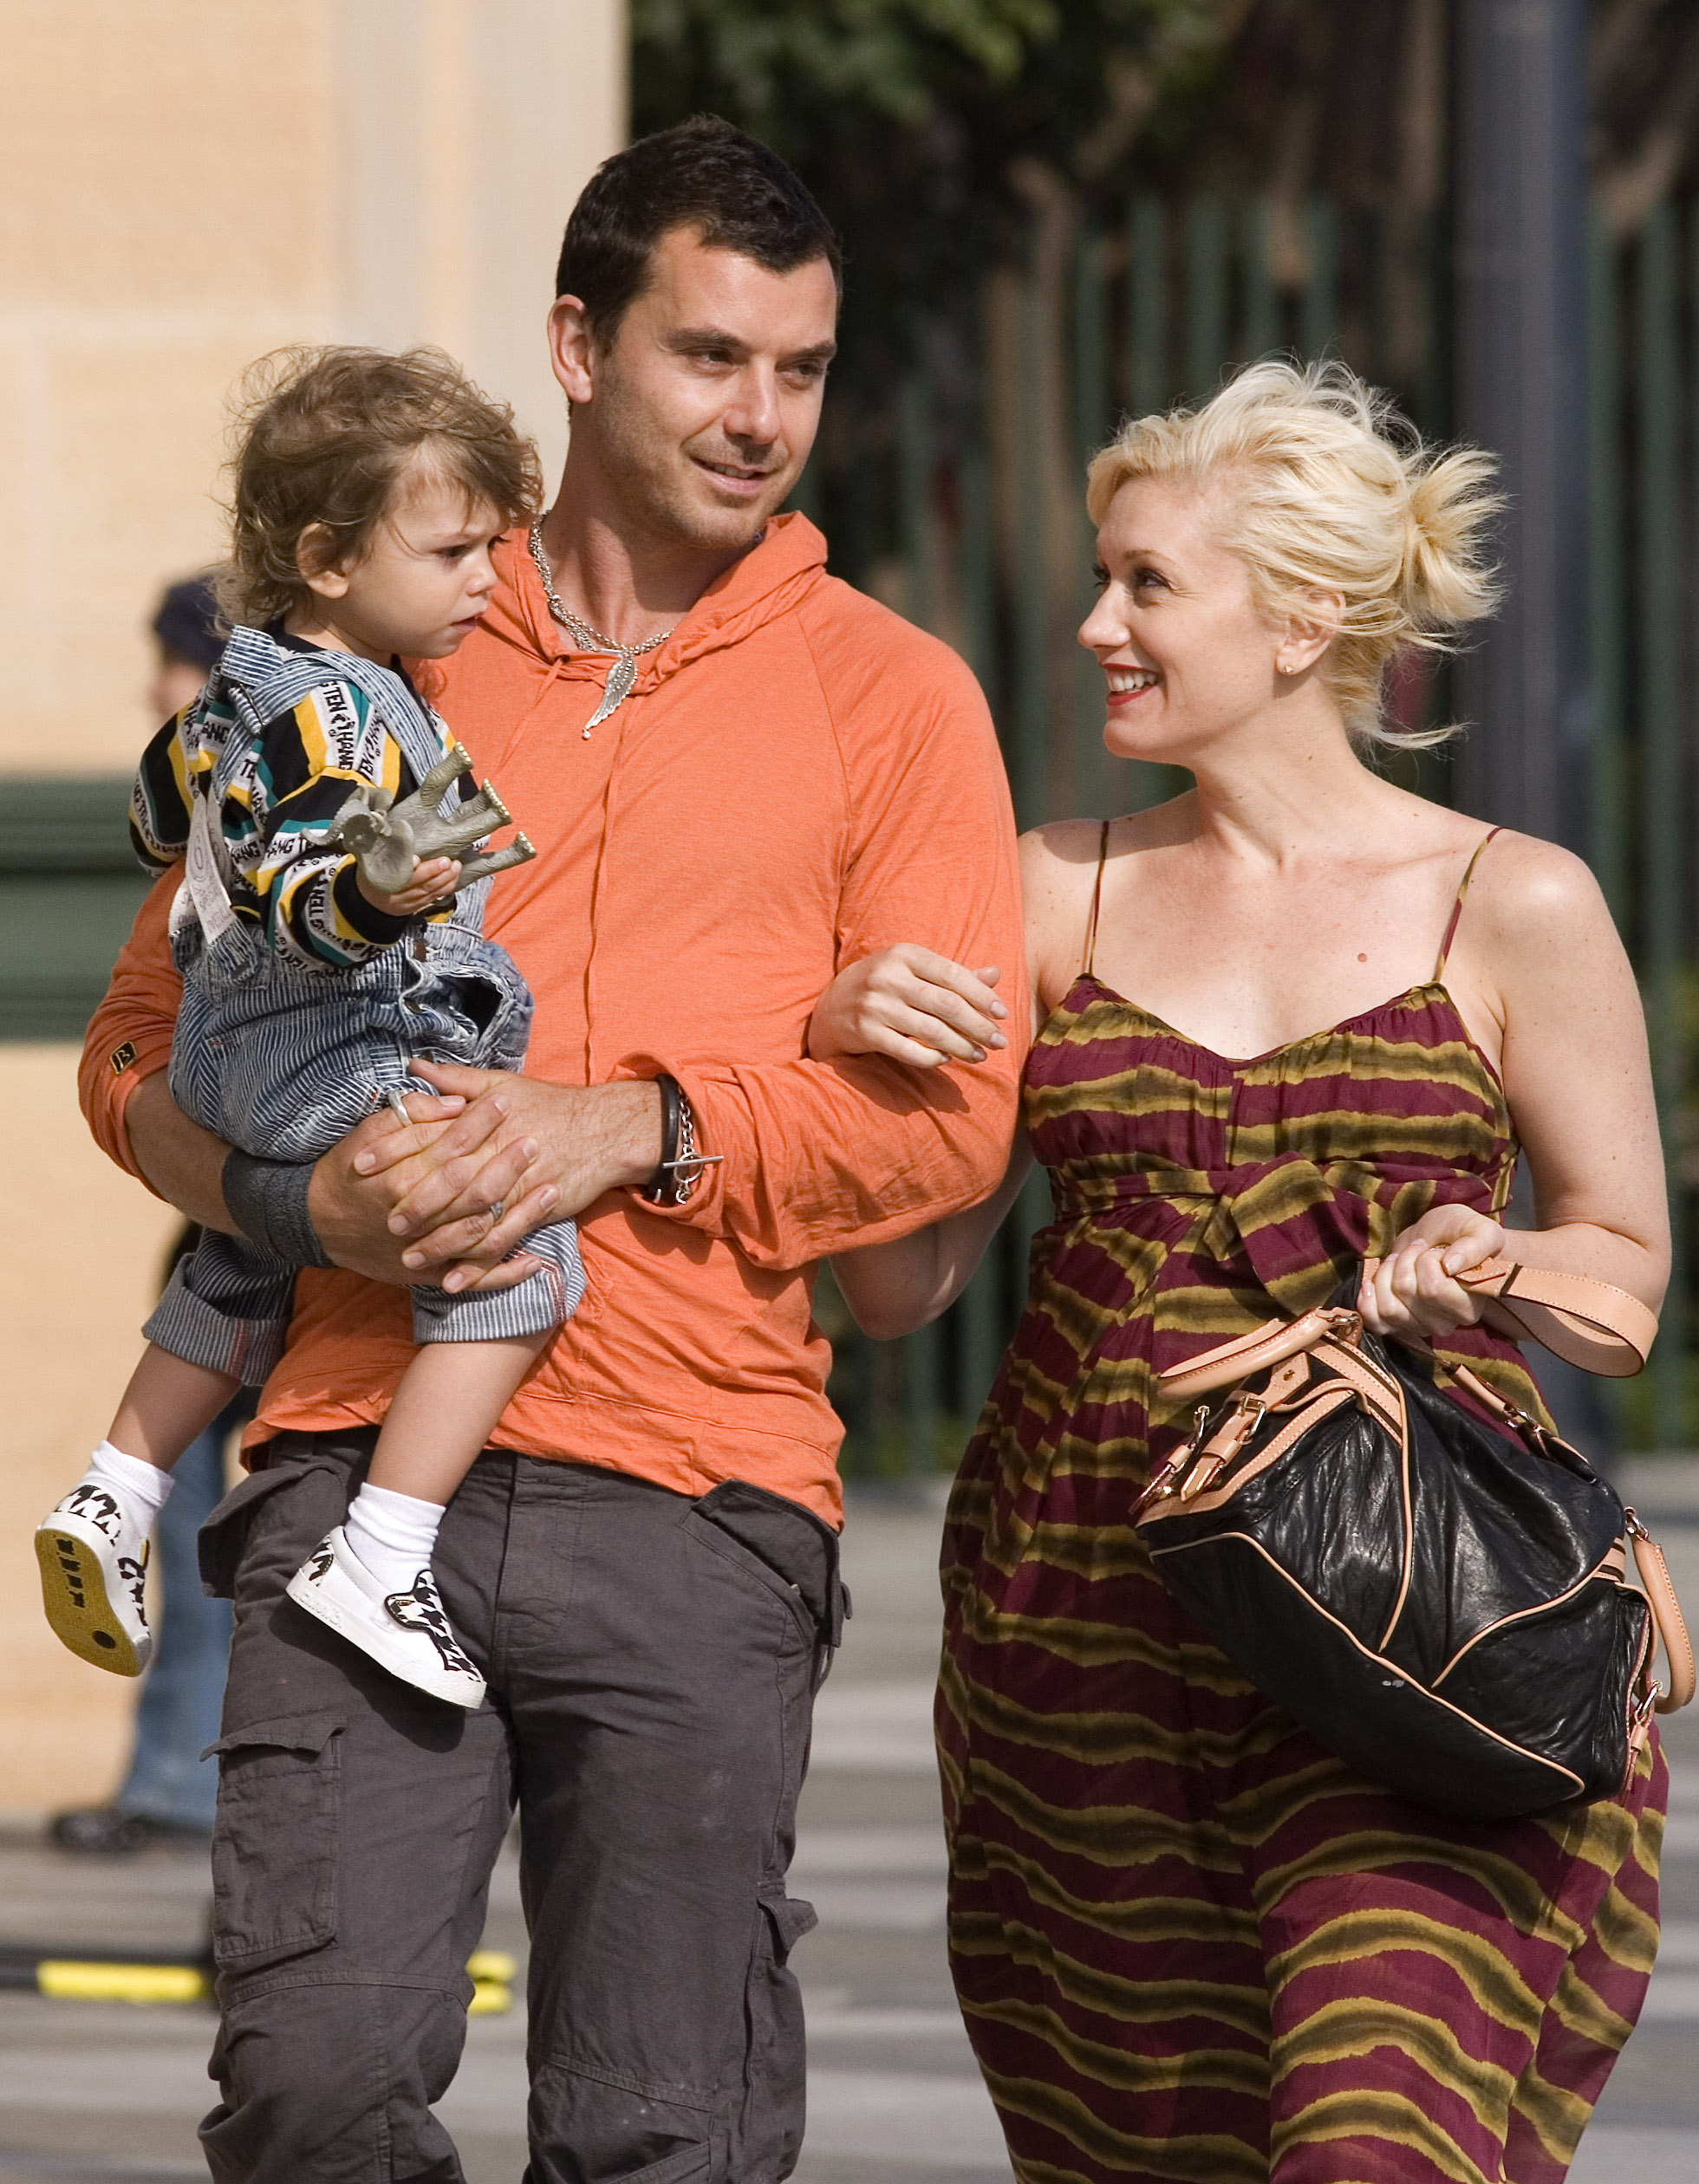 Gwen Stefani and Gavin Rossdale with their son Kingston in Los Angeles, in 2008 | Source: Getty Images